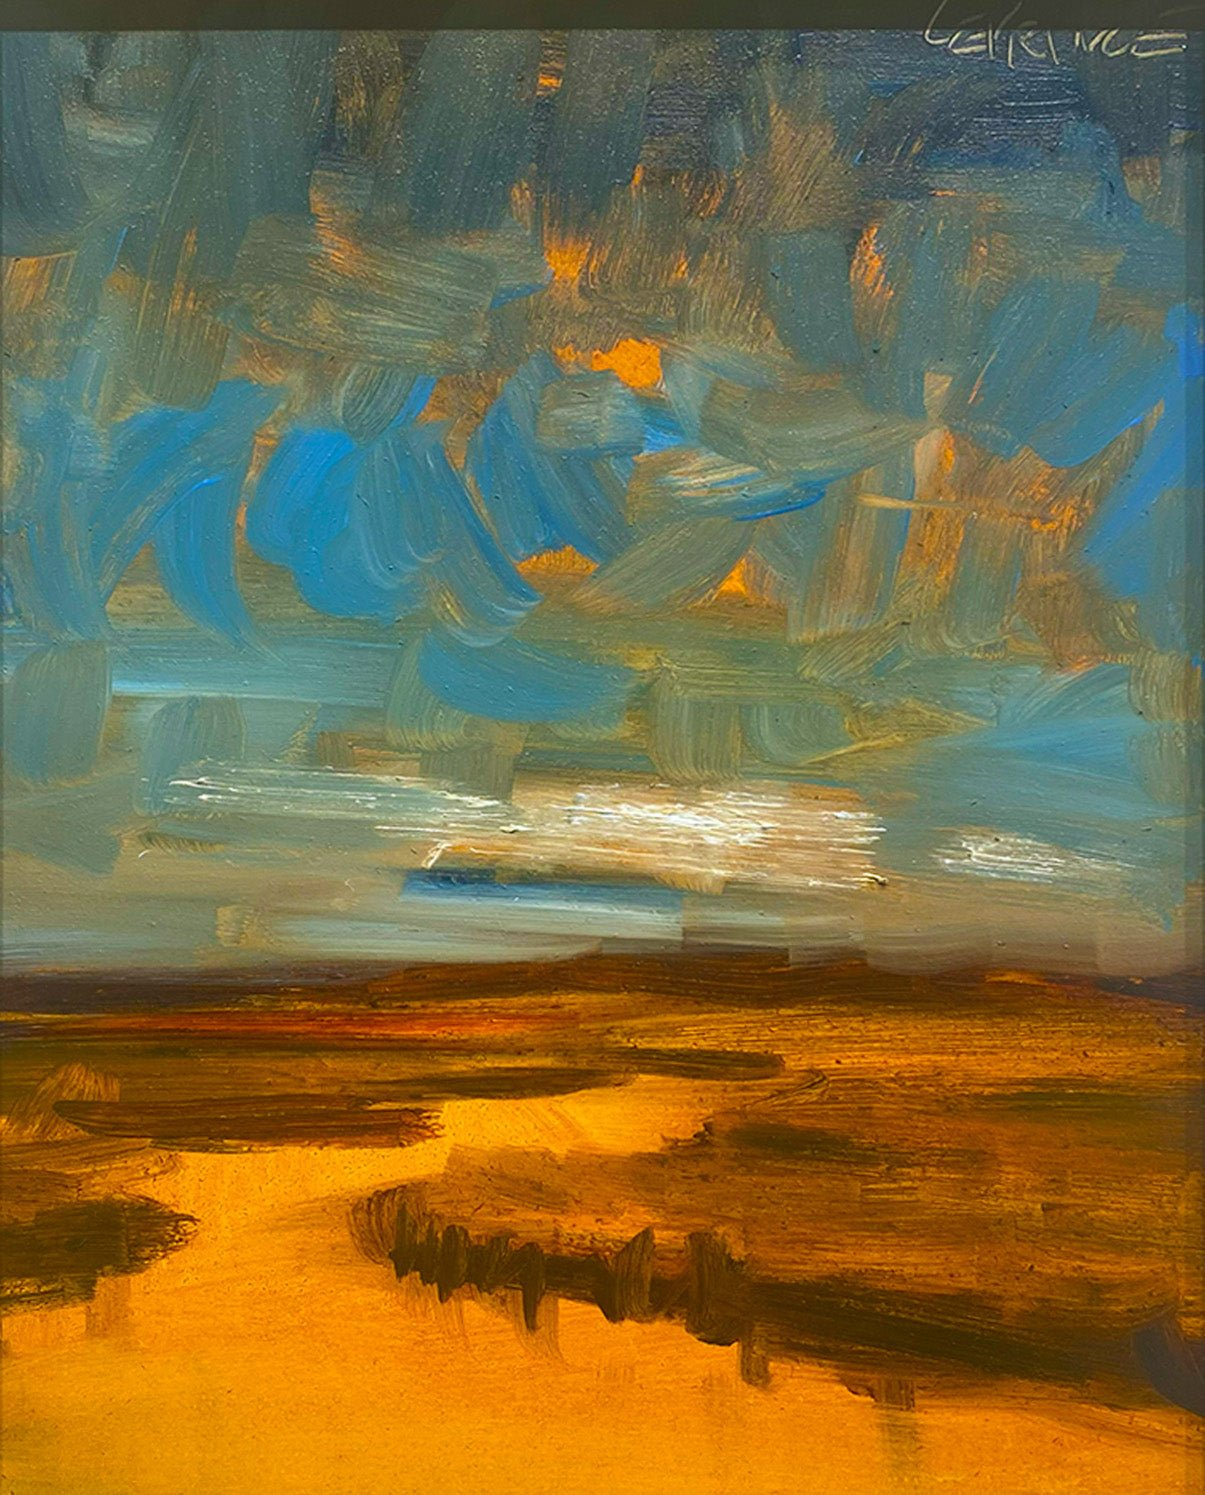 Golden Path by Kevin LePrince at LePrince Galleries